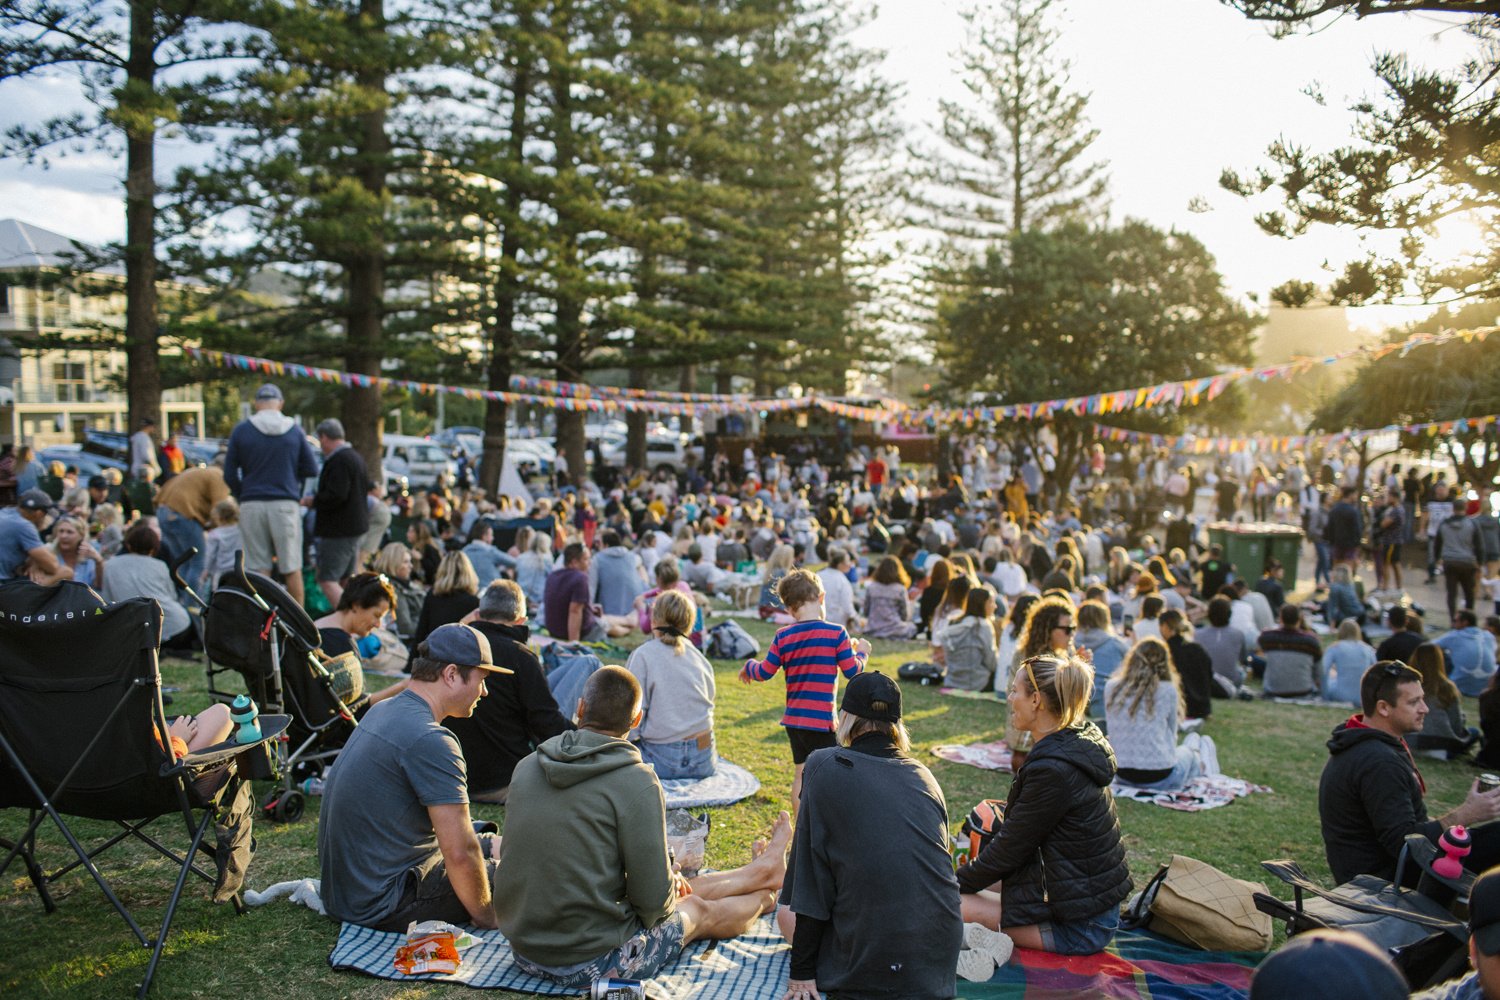 Seaside Sounds at Burleigh Point